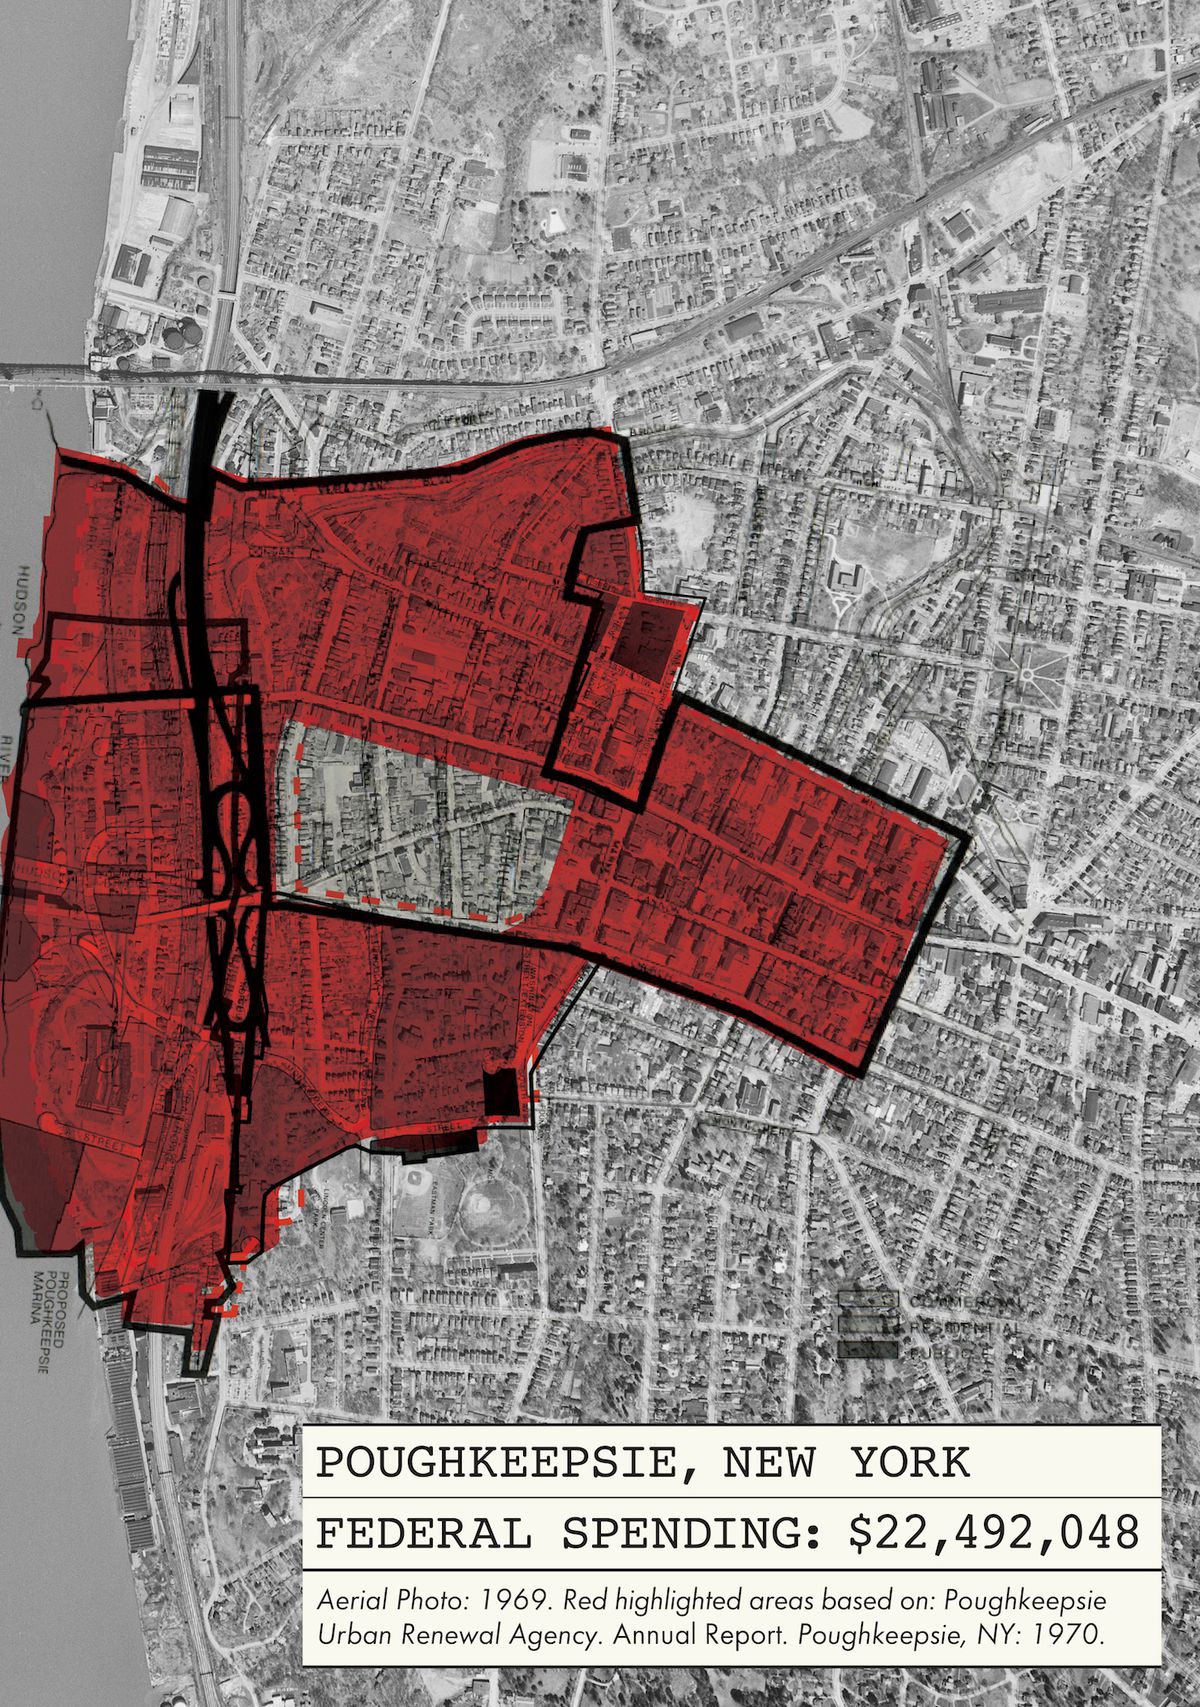 A black-and-white city map with redevelopment areas highlighted in red, which is most of the downtown region